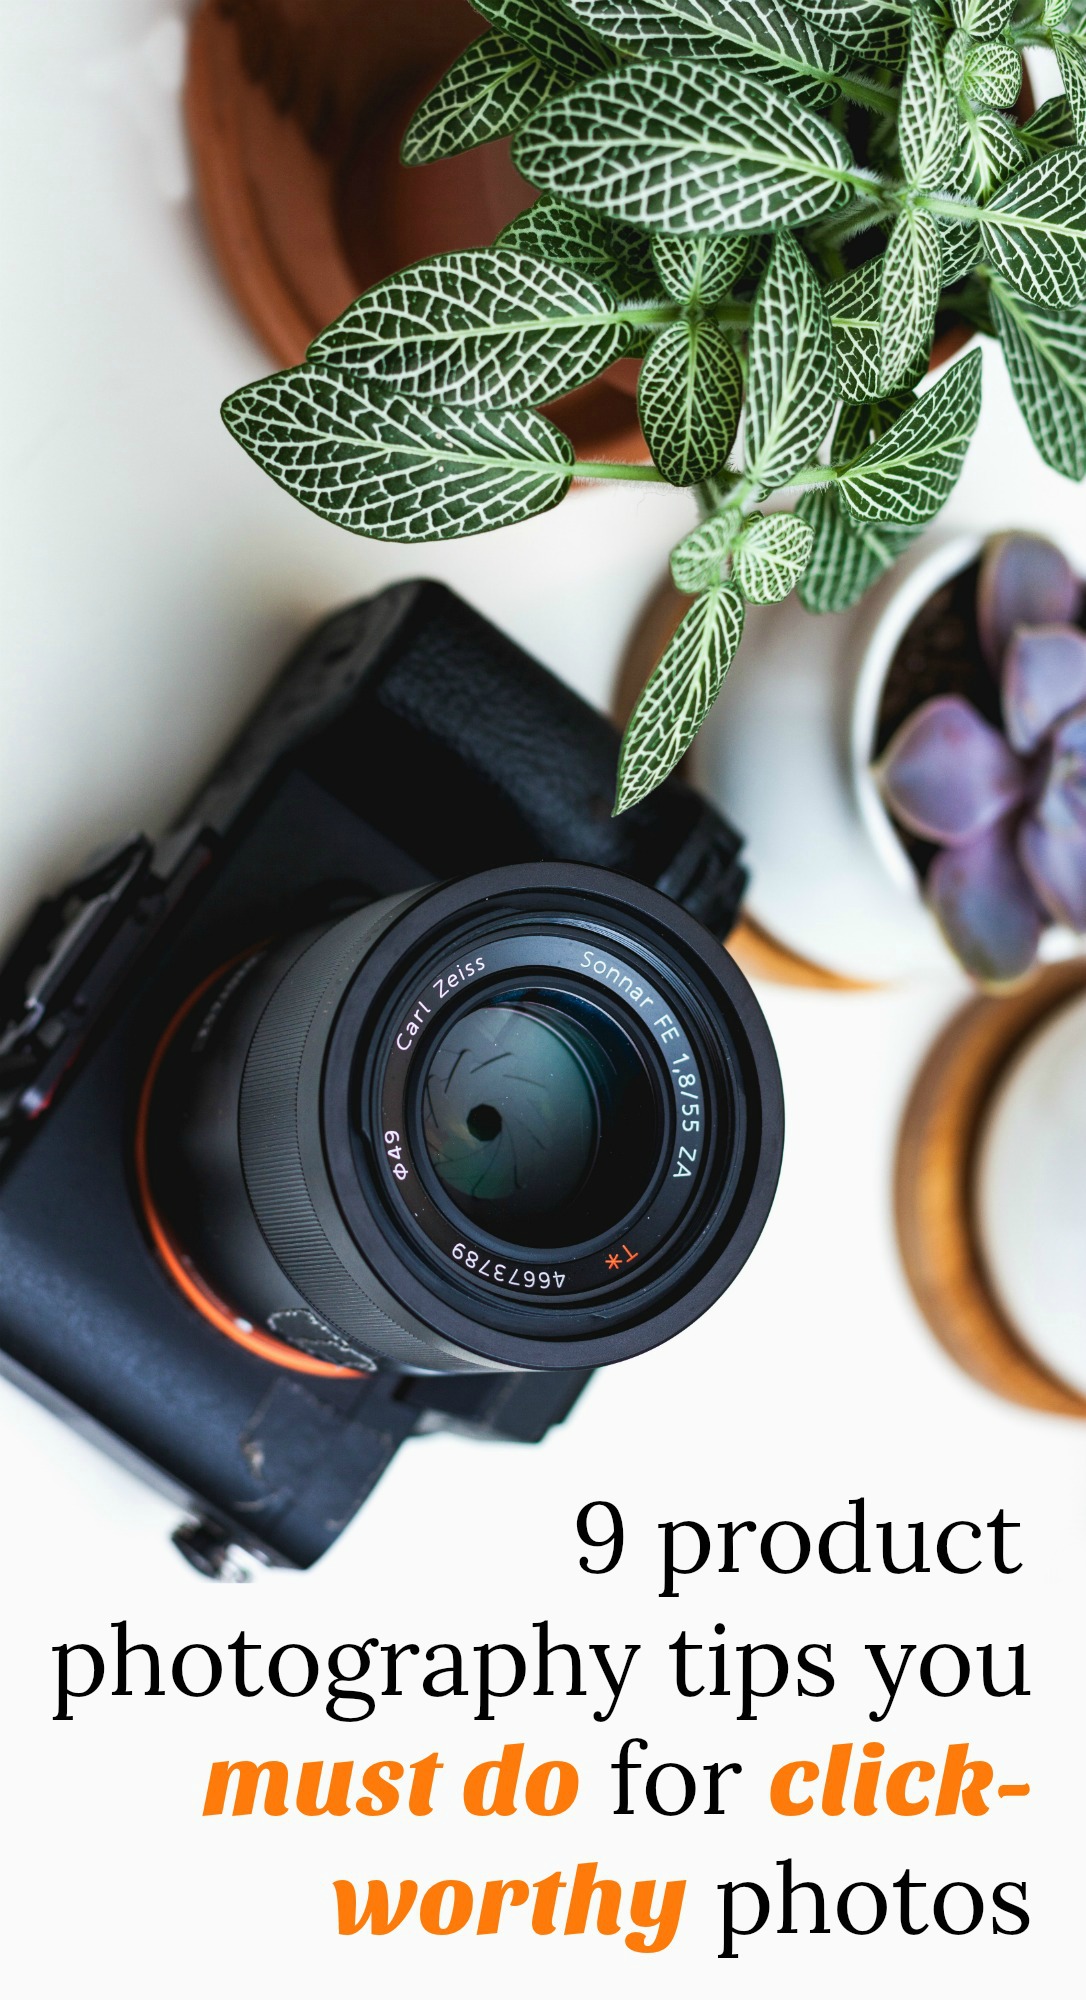 An image focused on a DSLR camera with a detachable lens. Text across the image says, "9 product photography tips you must do for click-worthy photos"